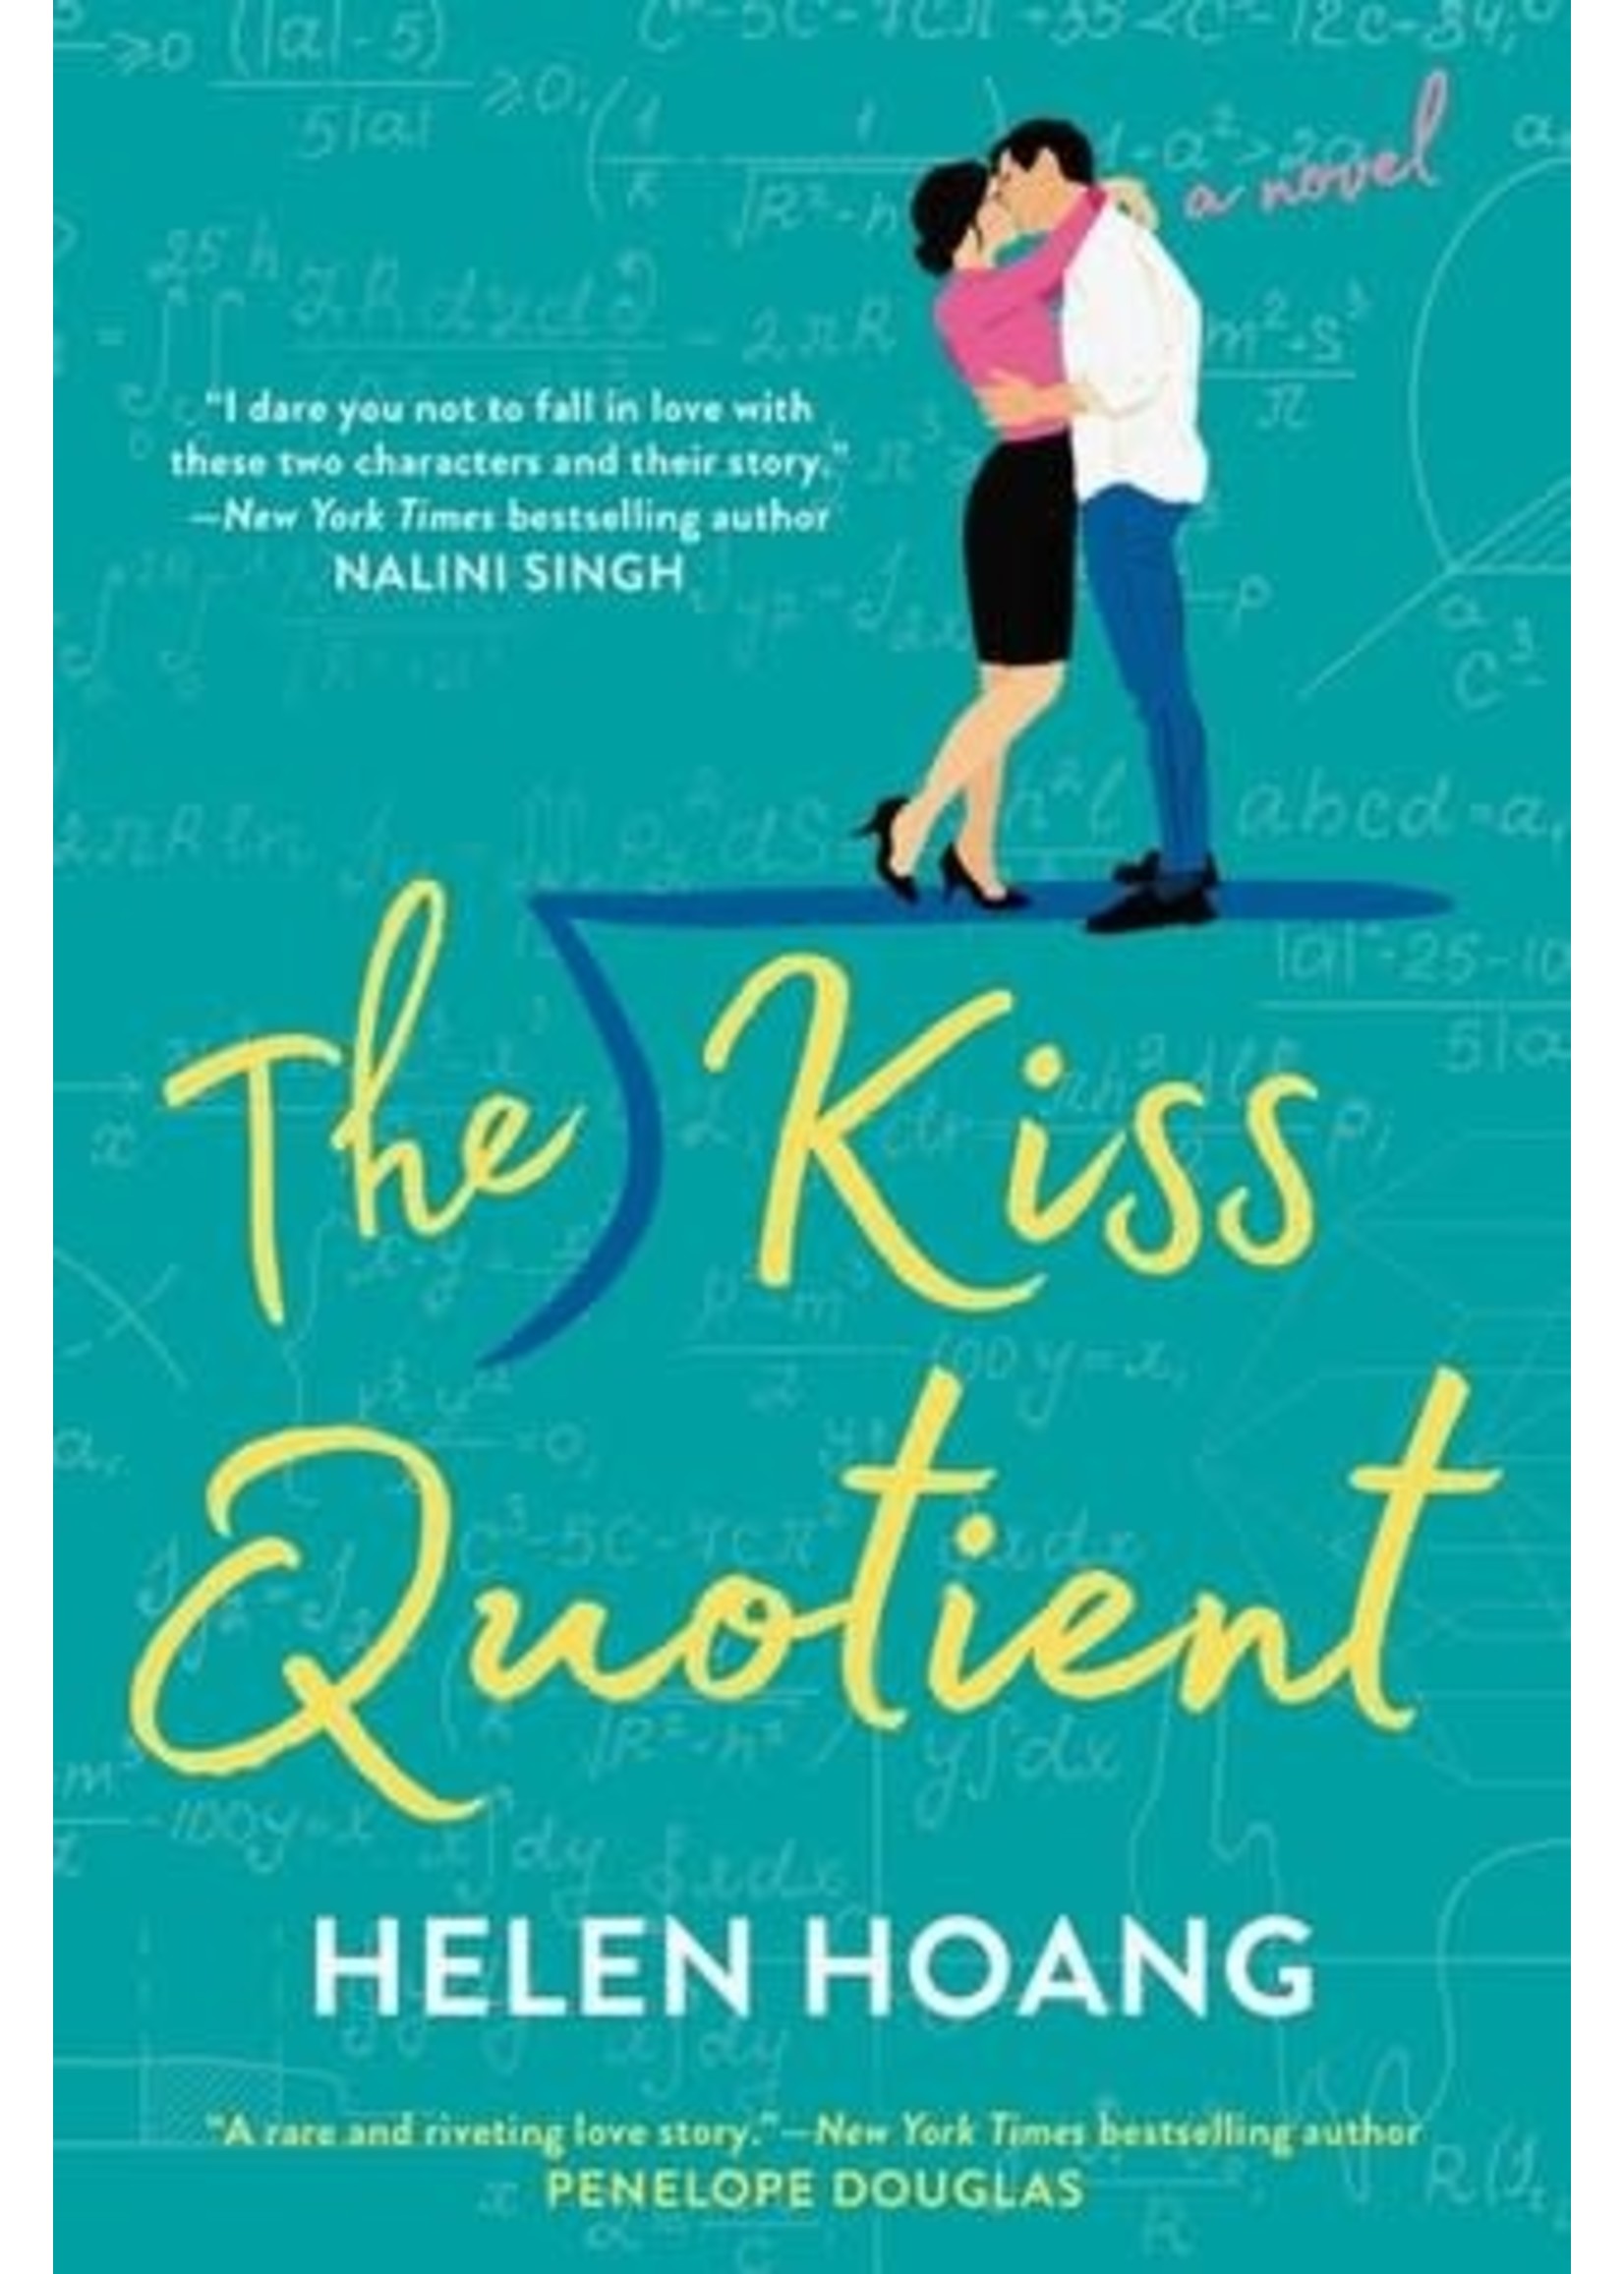 The Kiss Quotient (The Kiss Quotient #1) by Helen Hoang